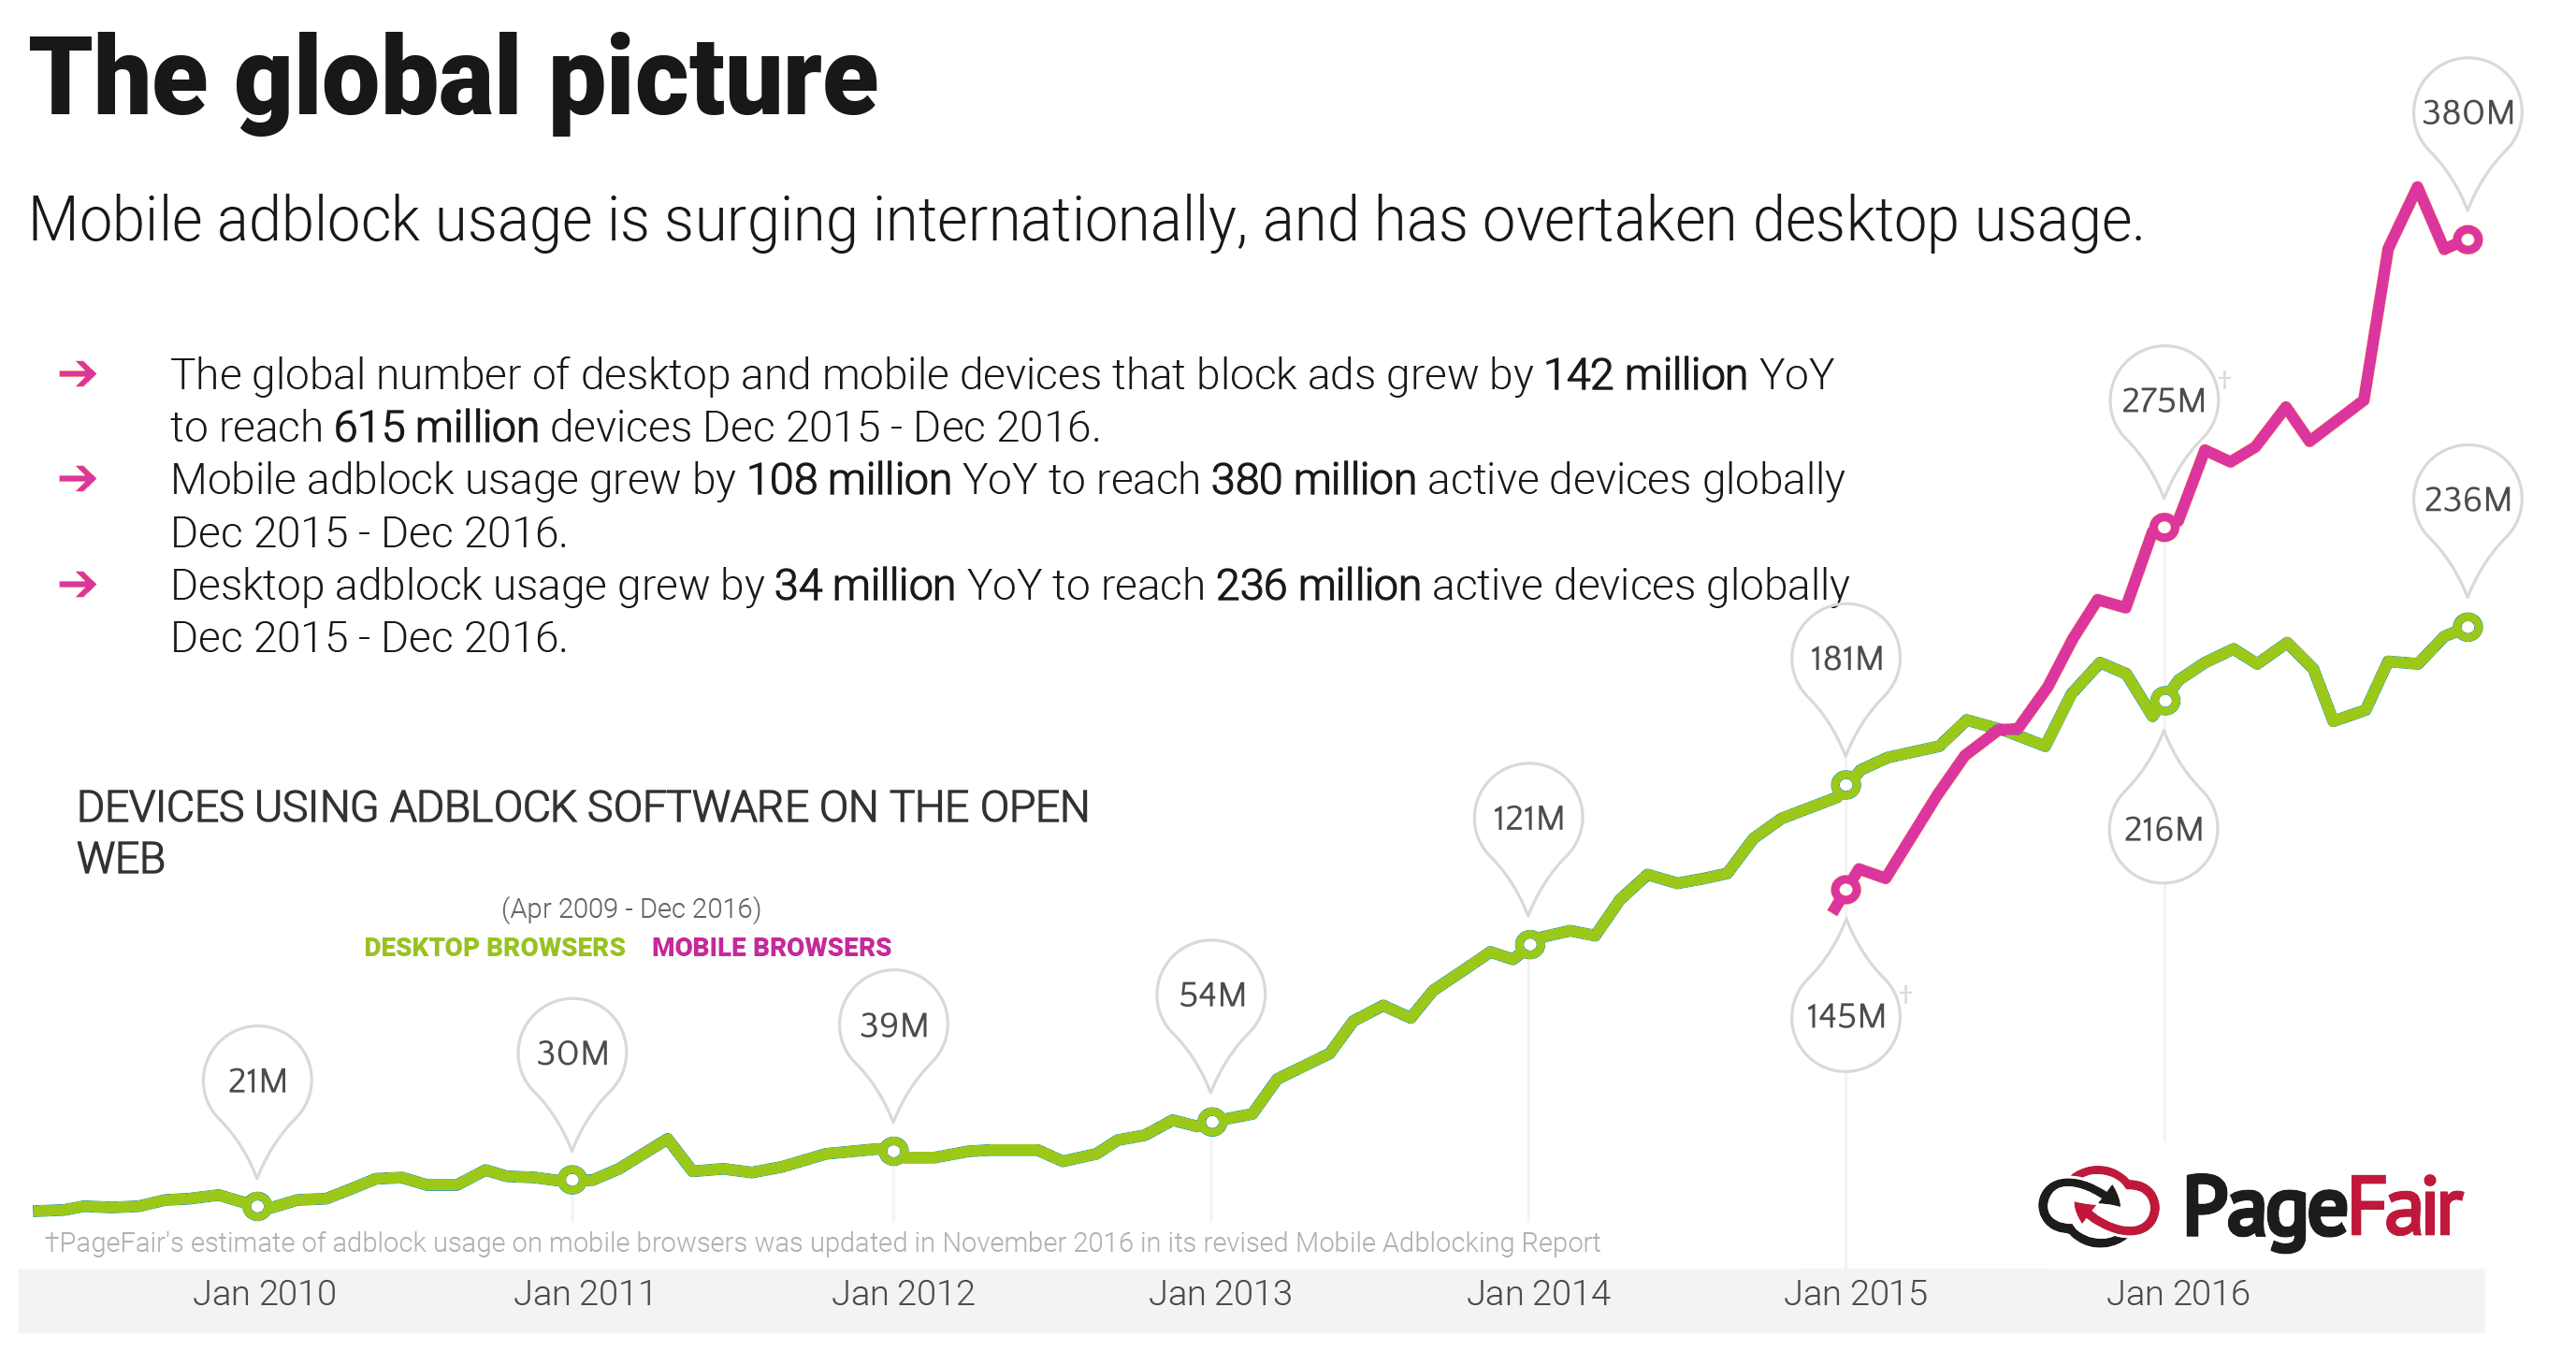 CHART: The global picture - mobile adblock usage is surging internationally, and has overtaken desktop usage